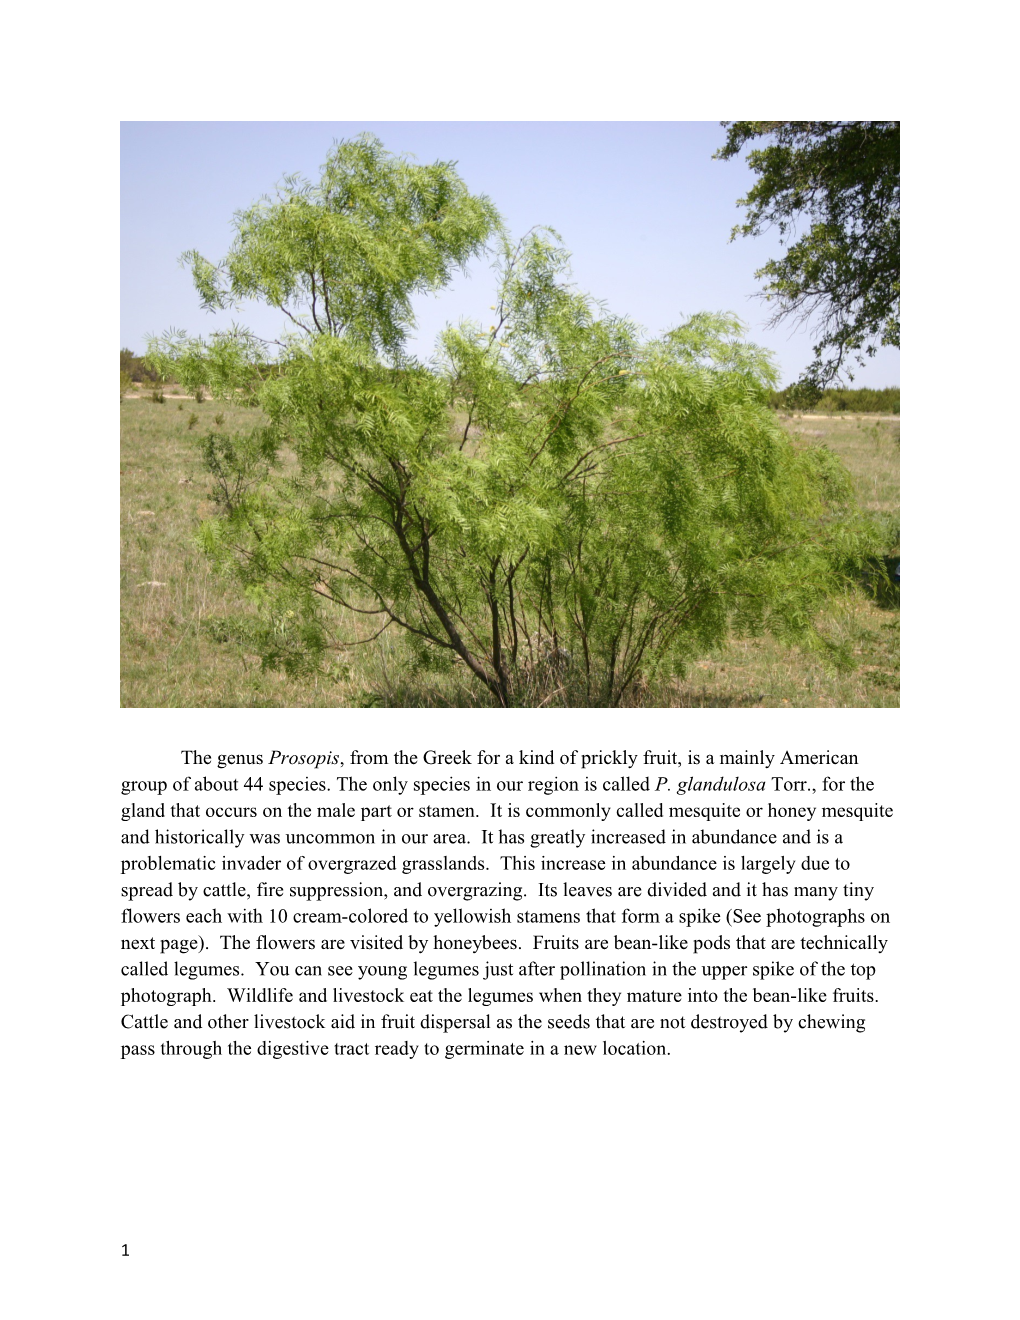 The Genus Prosopis, from the Greek for a Kind of Prickly Fruit, Is a Mainly American Group